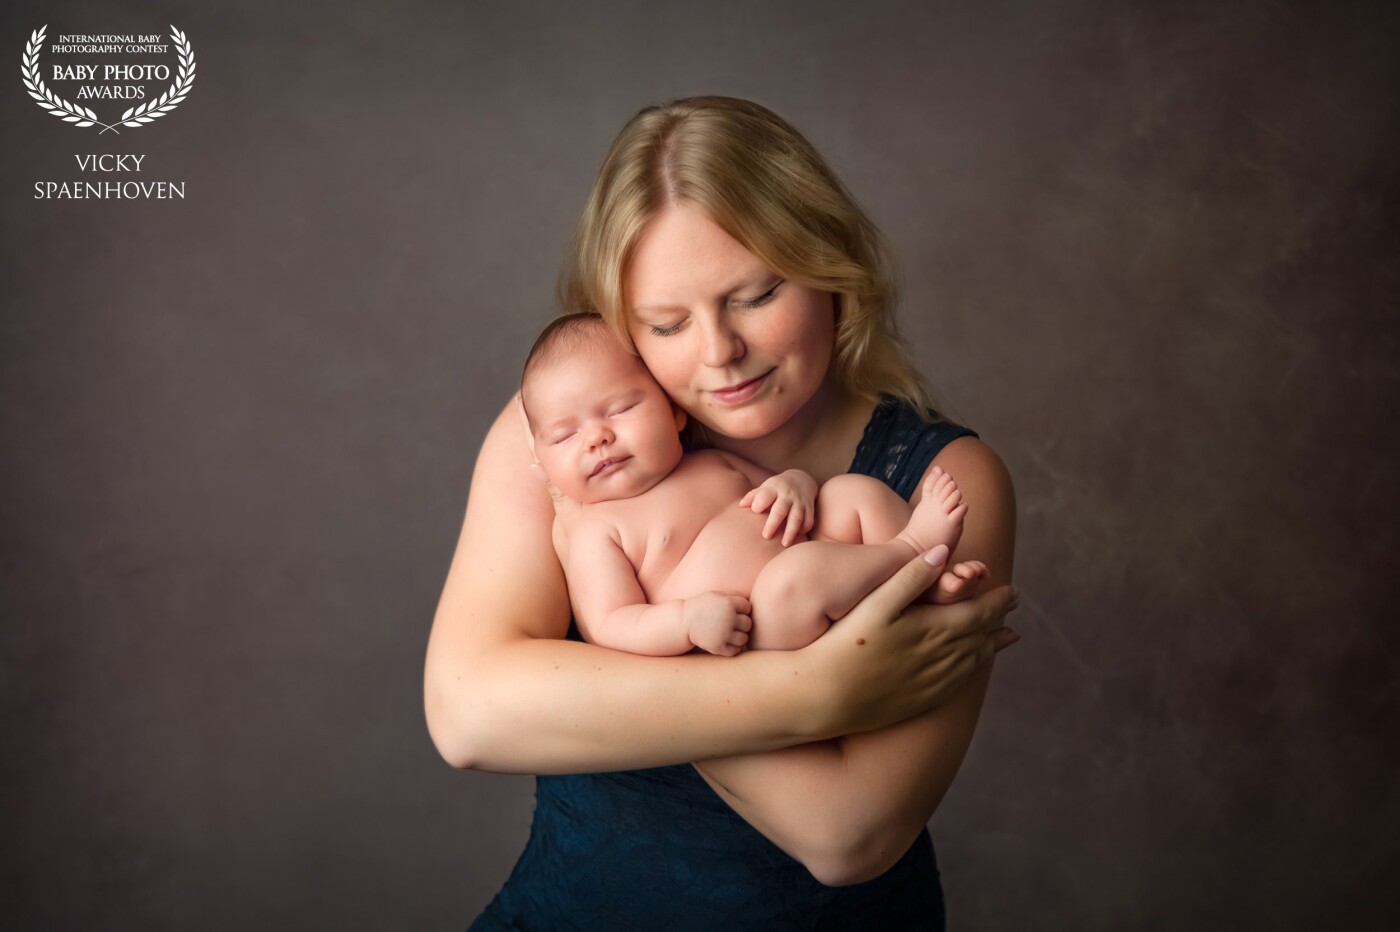 Pure love between a mother and her newborn babygirl of almost three weeks old.  I used a big softbox to create soft light en shadows. A picture to cherish forever. ❤️